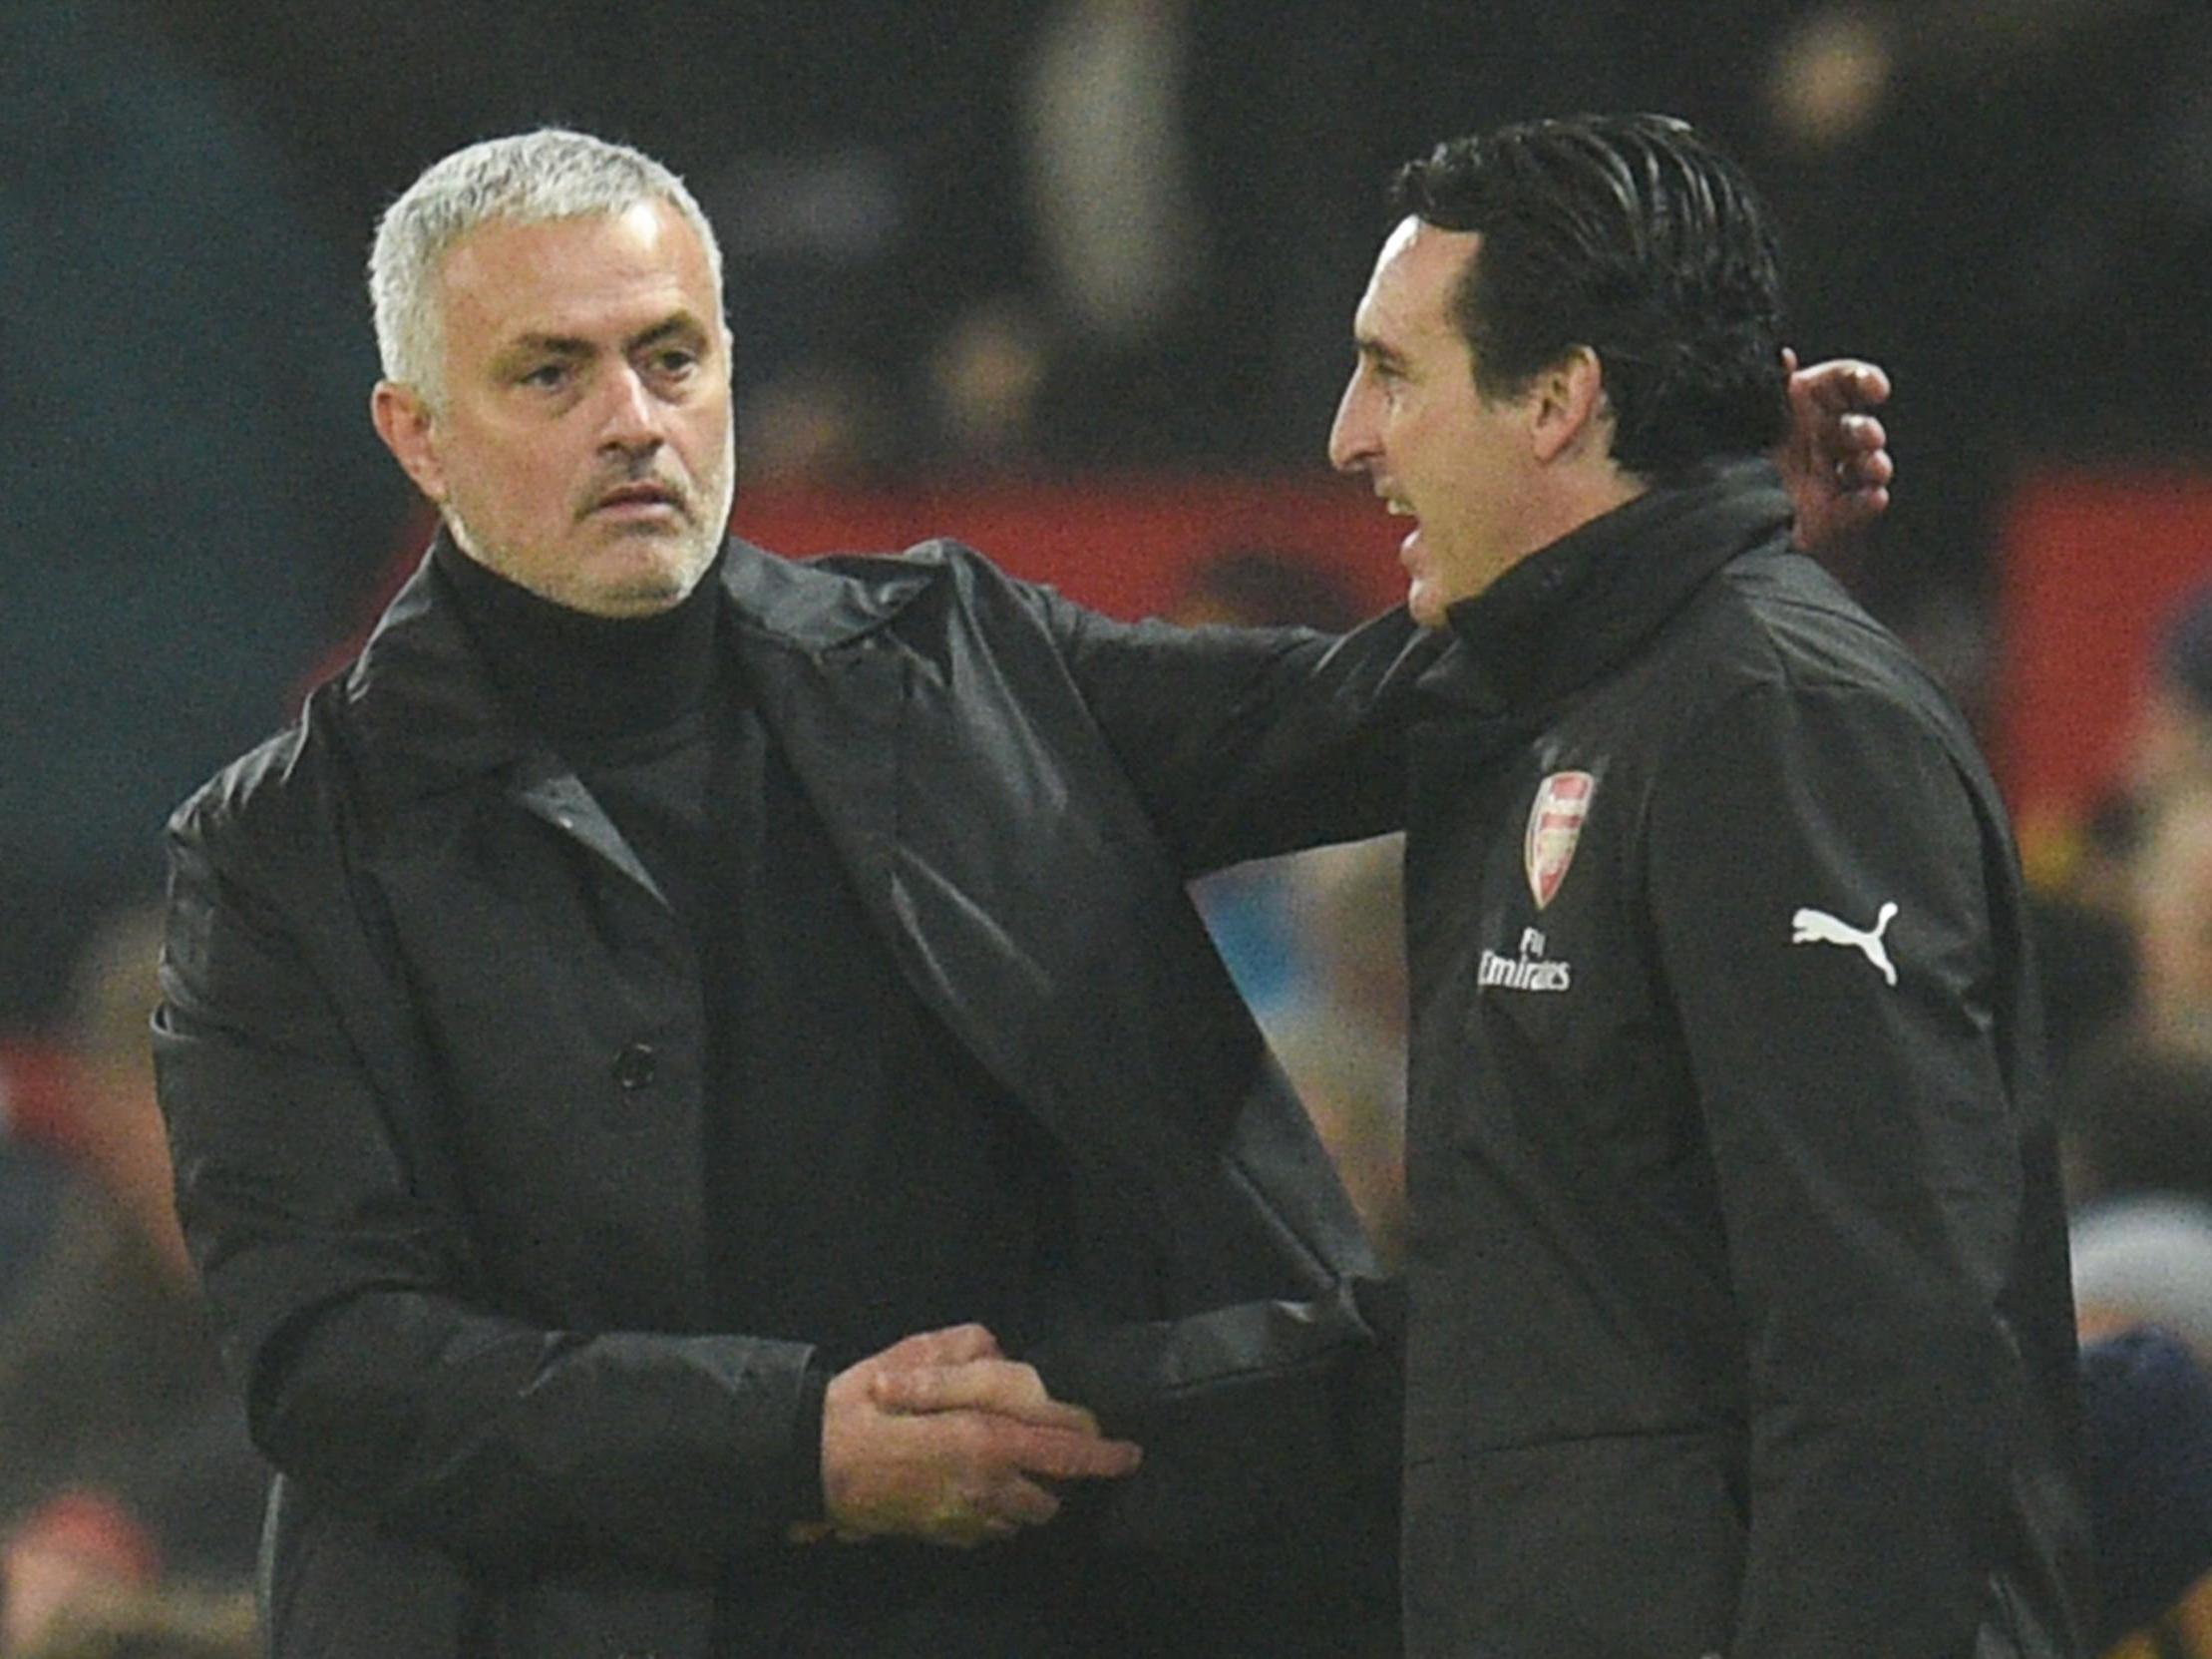 Emery isn't surprised Mourinho was sacked (AFP/Getty Images)